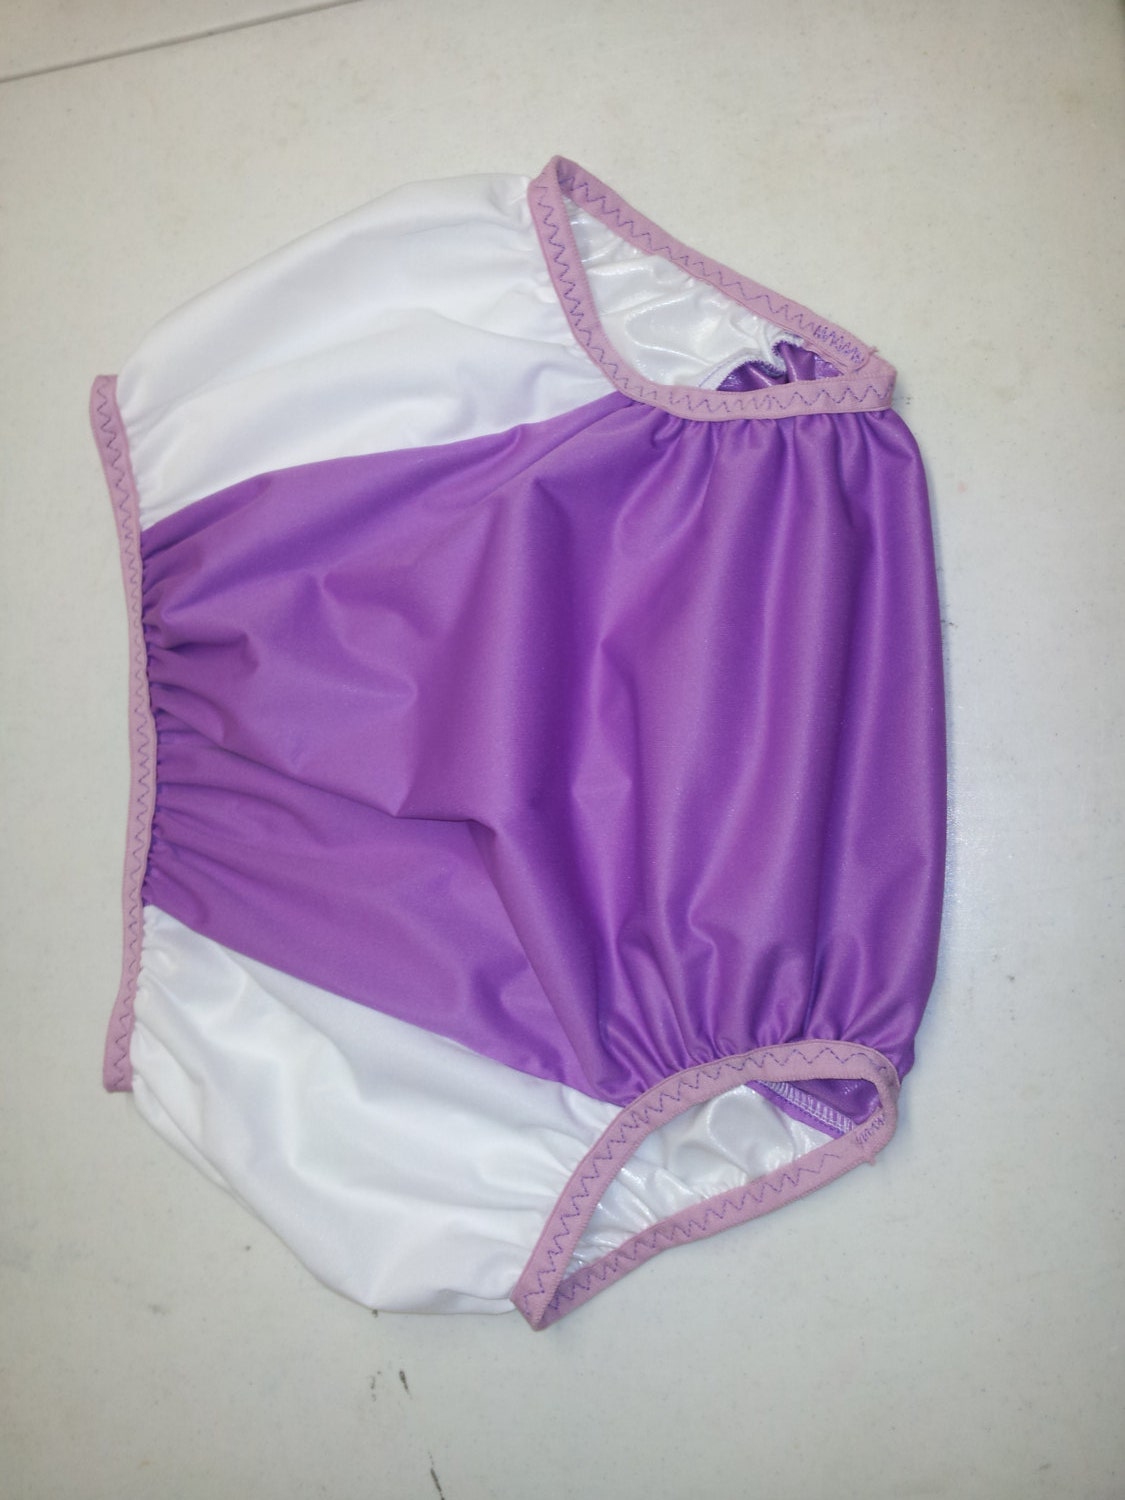 Adult Diaper Cover Lavender and White Size 30 to 40 inches